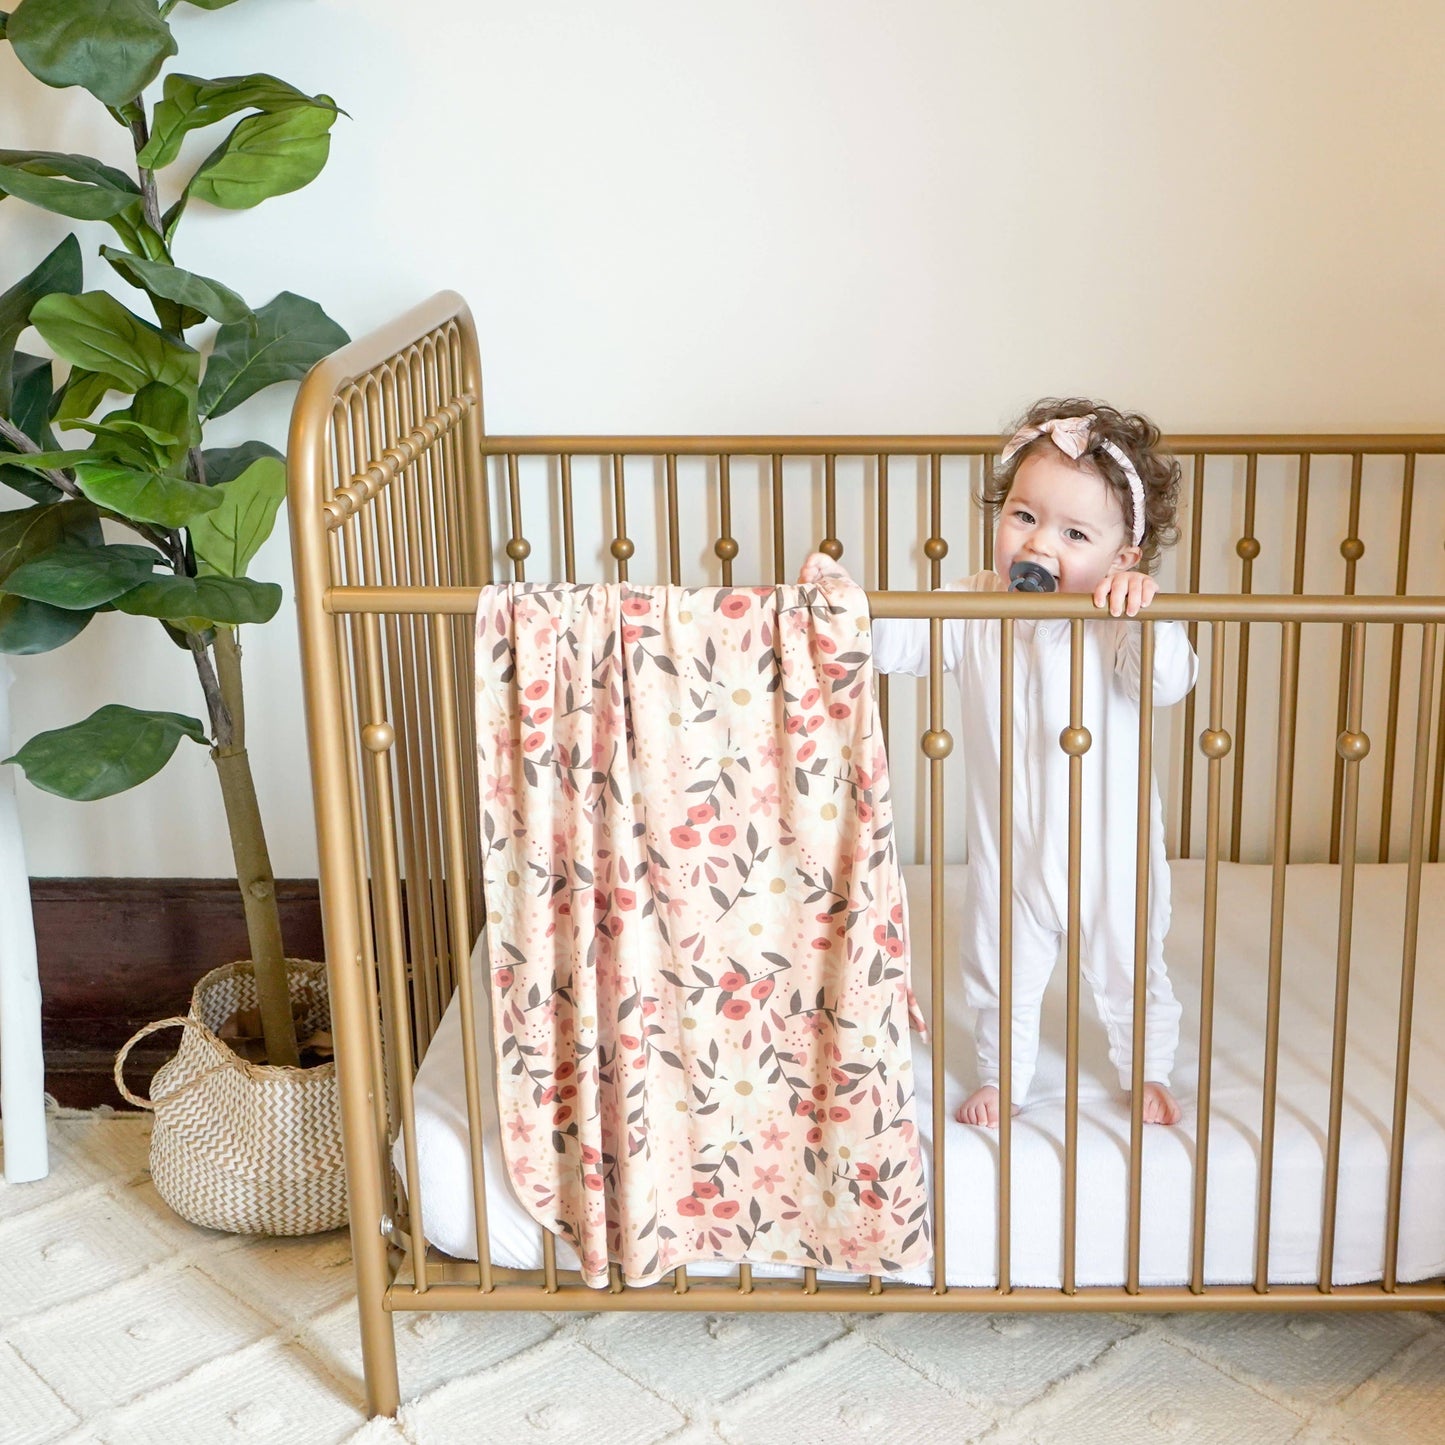 Peach Posey Swaddle Blanket